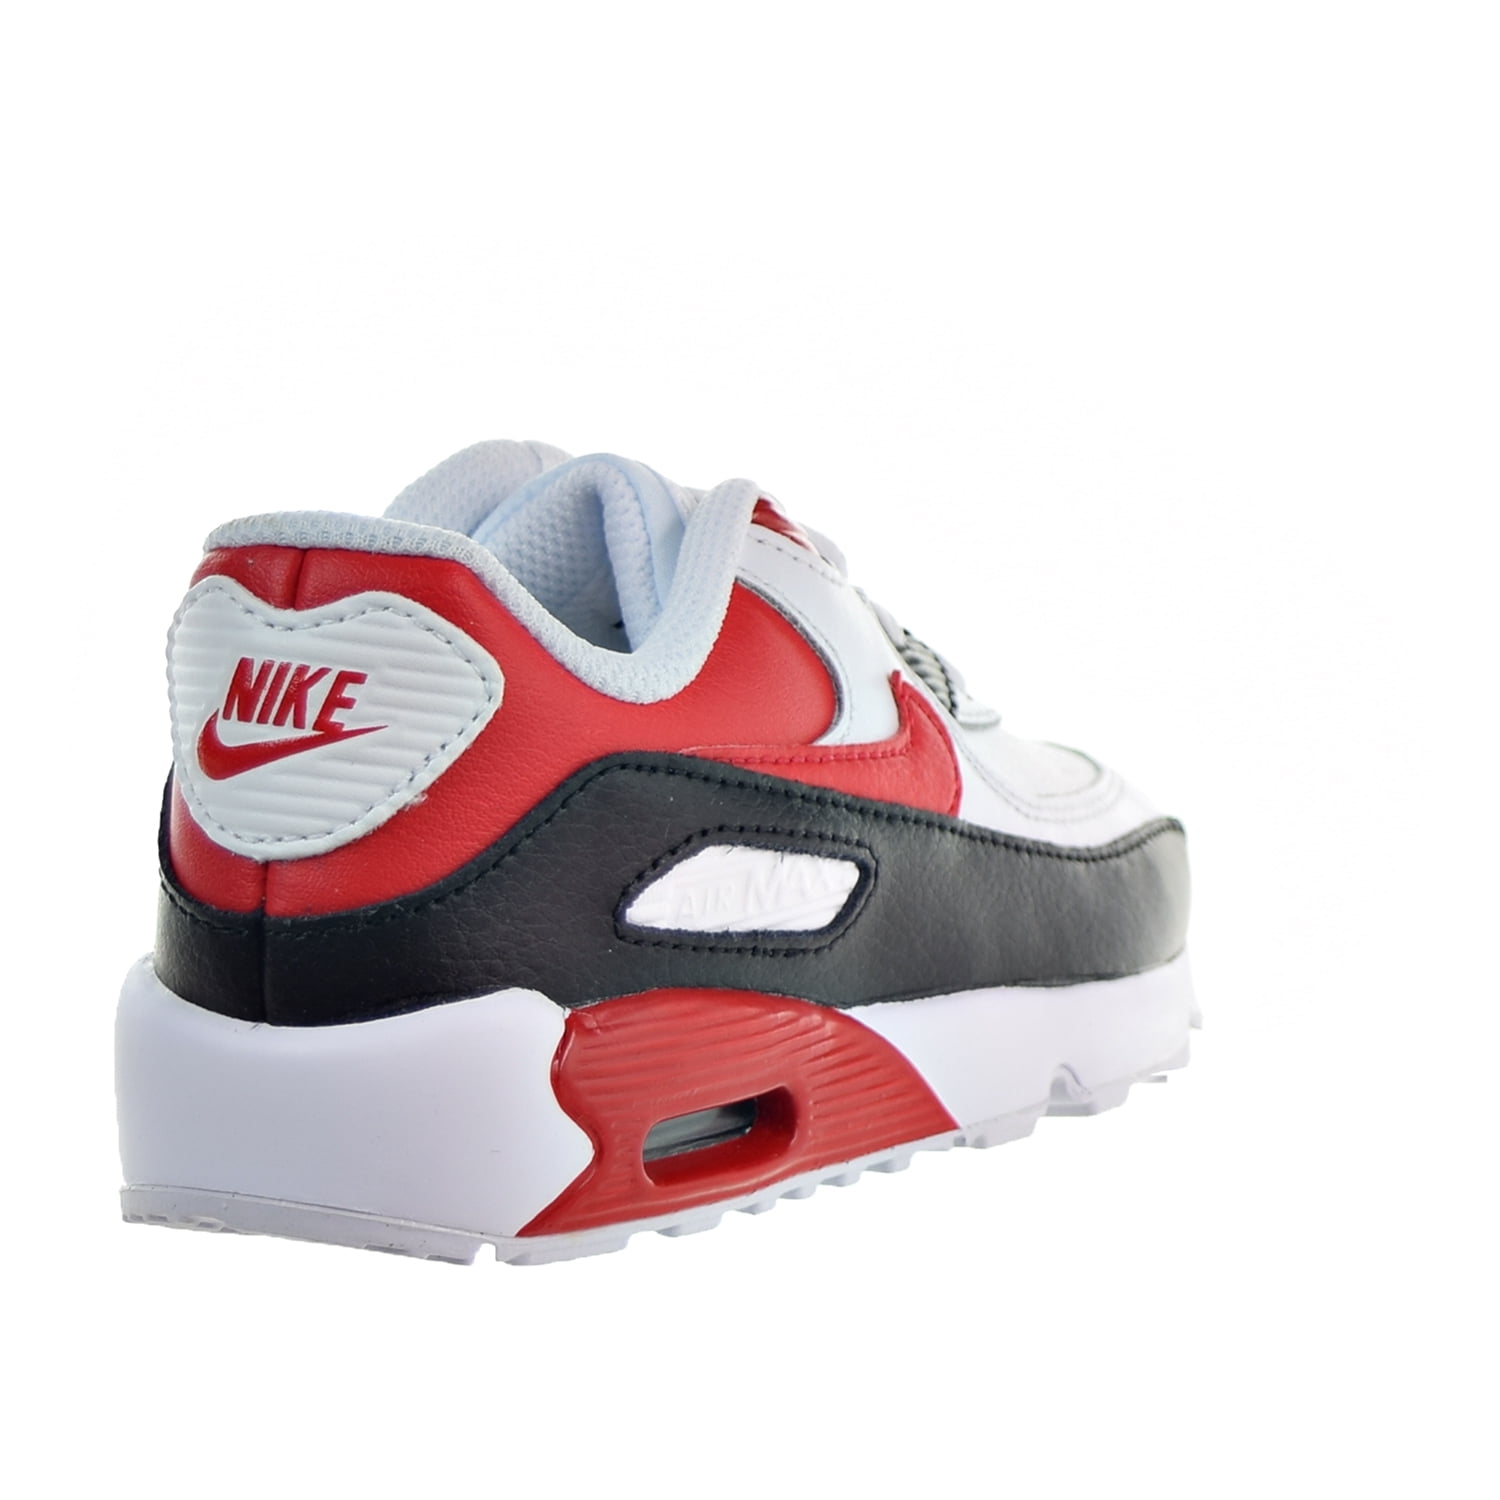 Nike Air Max 90 Triple Red Mens US 8.5-13 Running Shoes Sneakers NEW ☑️